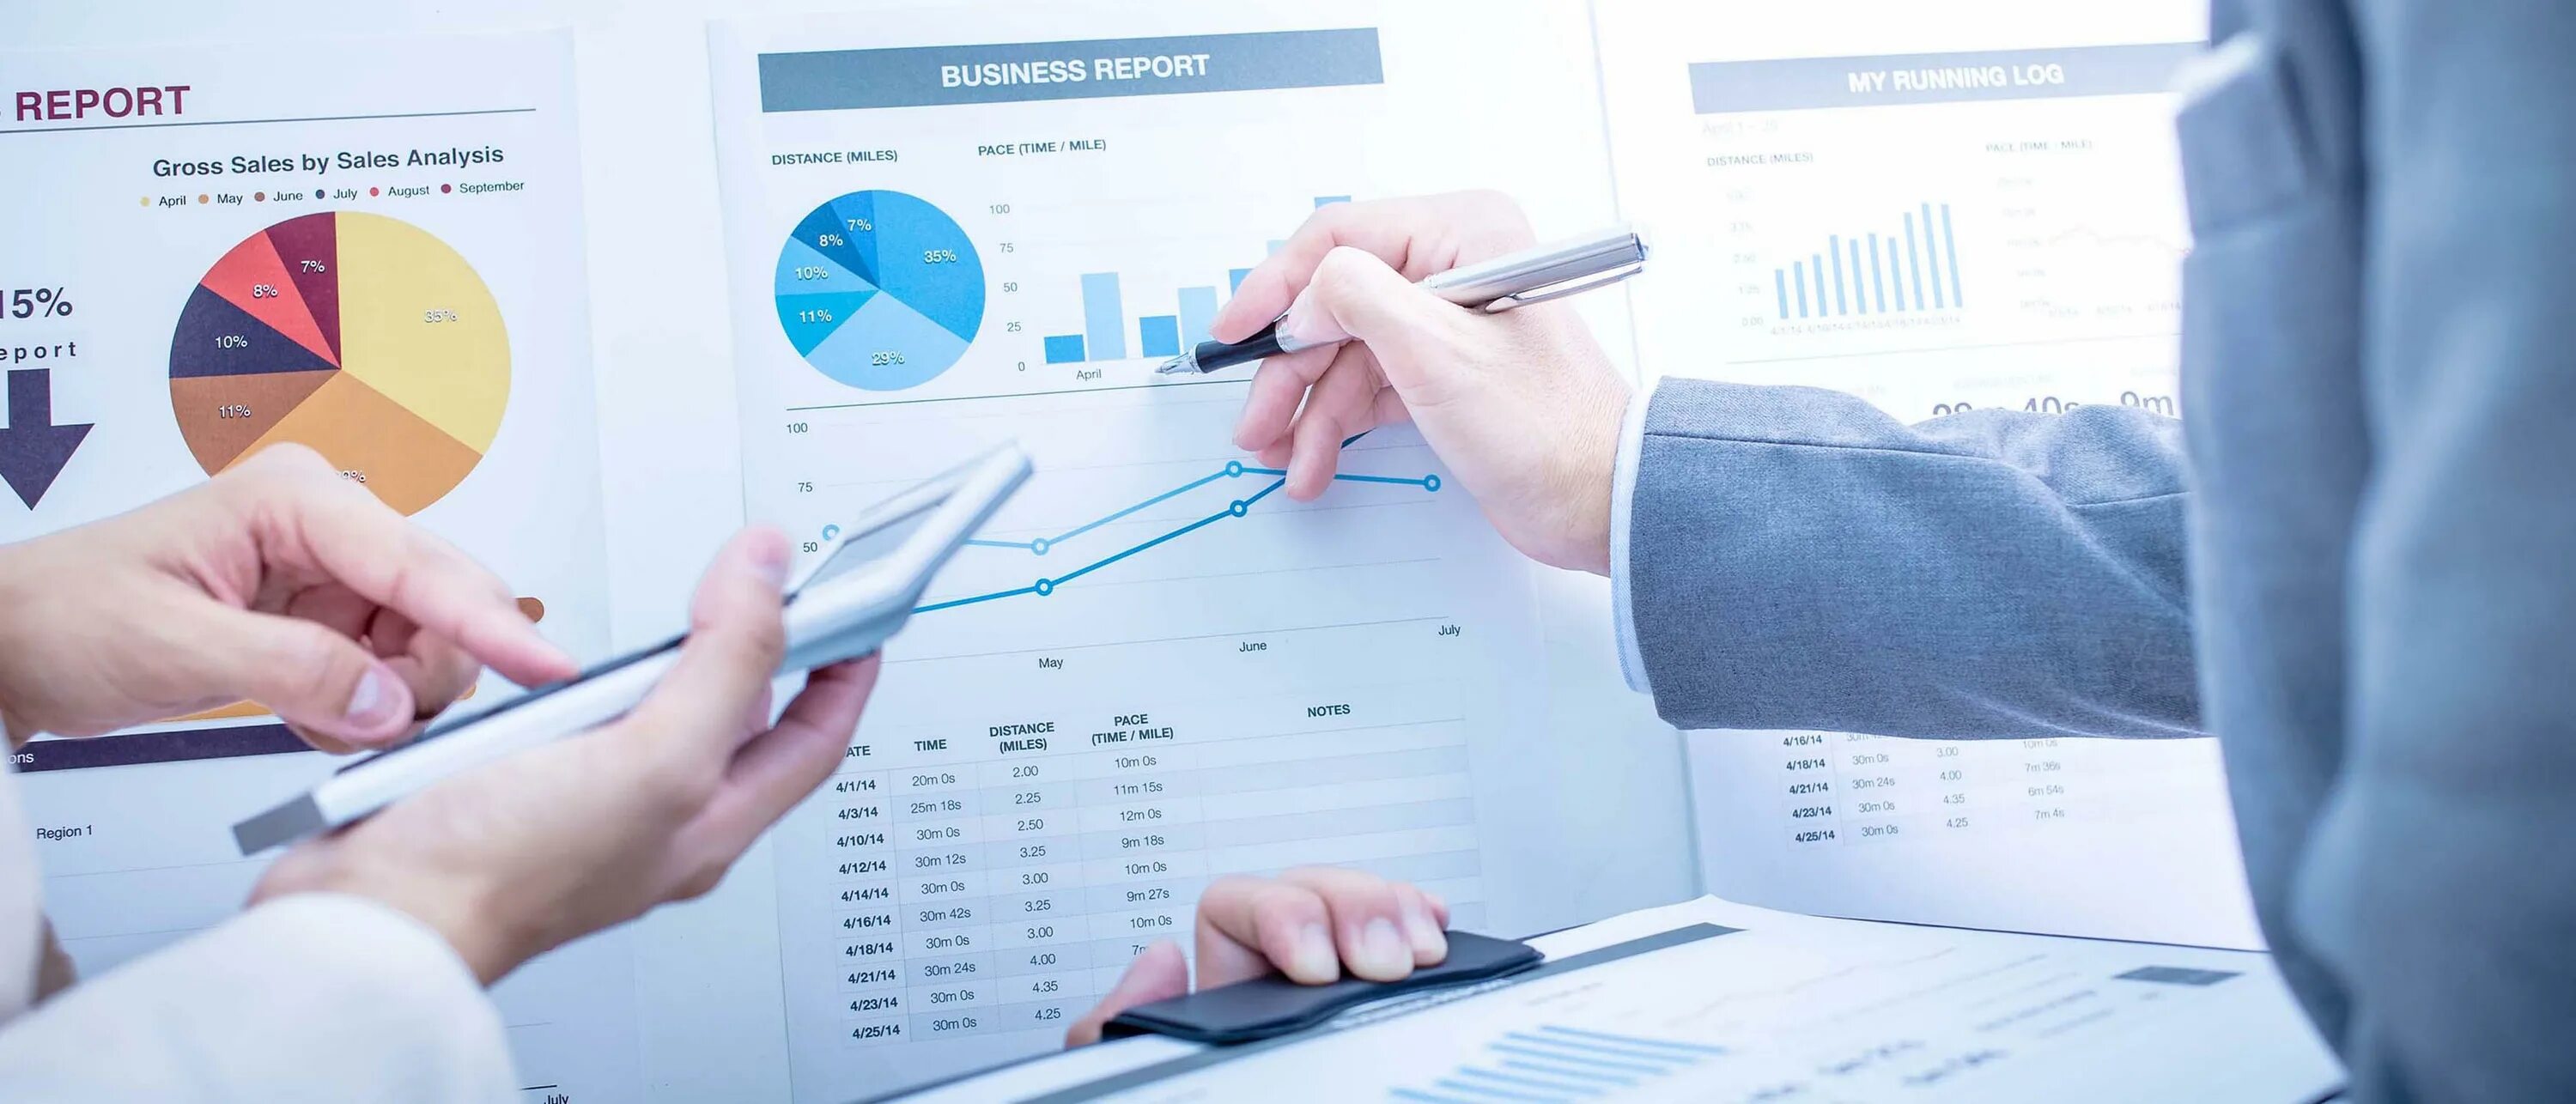 Business Report. Бизнес отчет. Sales reporting картинка для презентации. Analysis and reporting. Https reports by